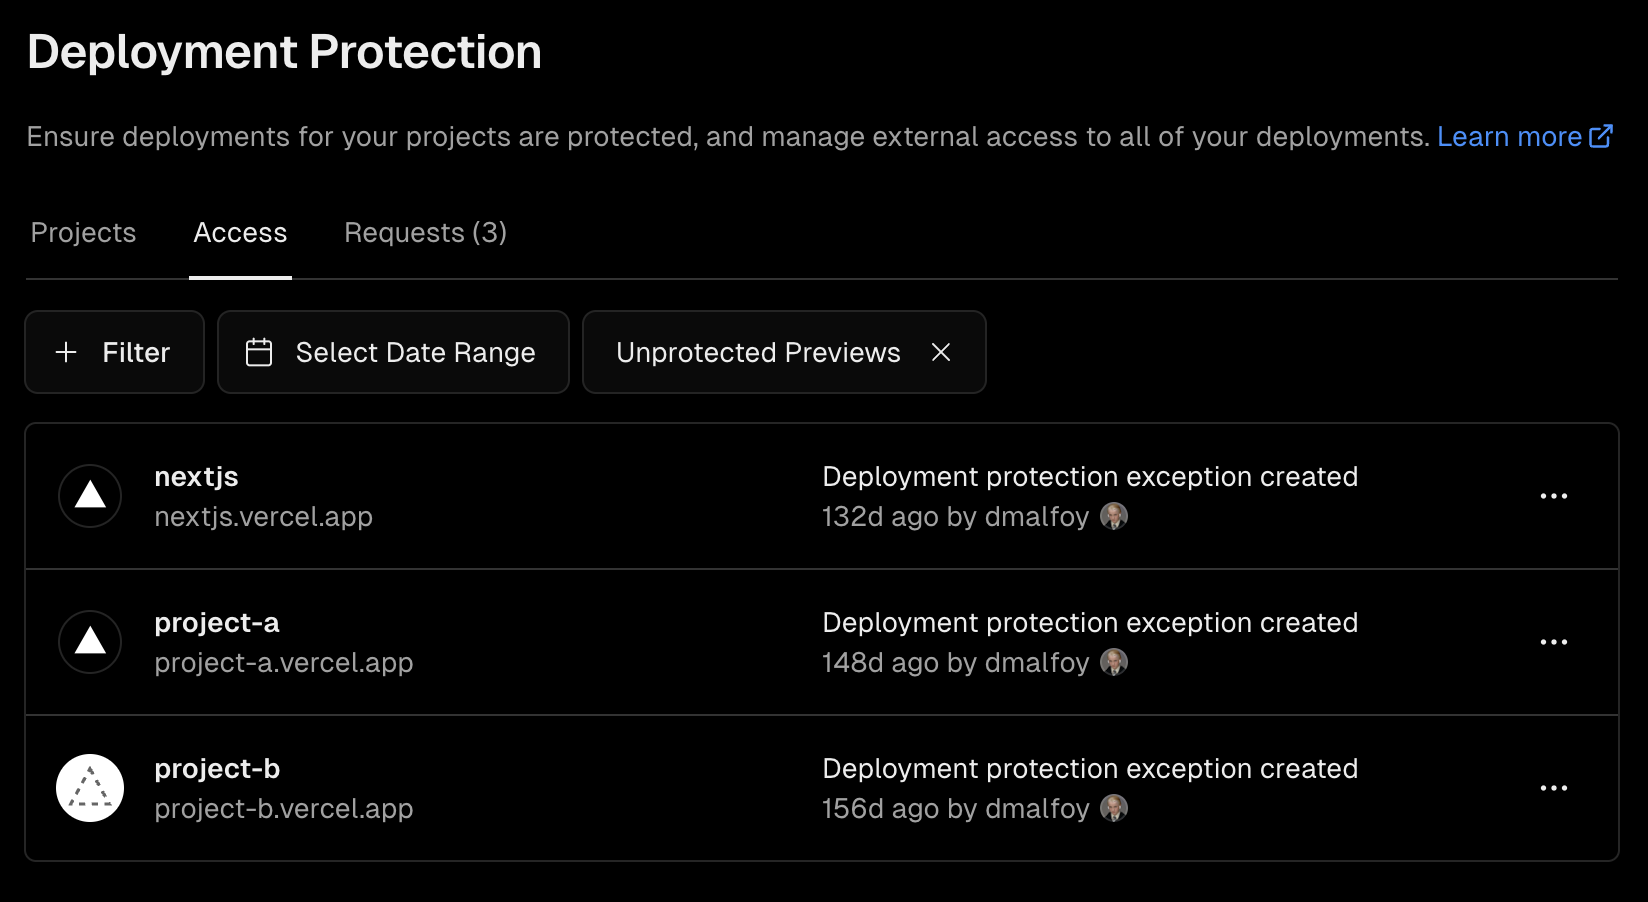 Dashboard > Settings > Deployment Protection > Access